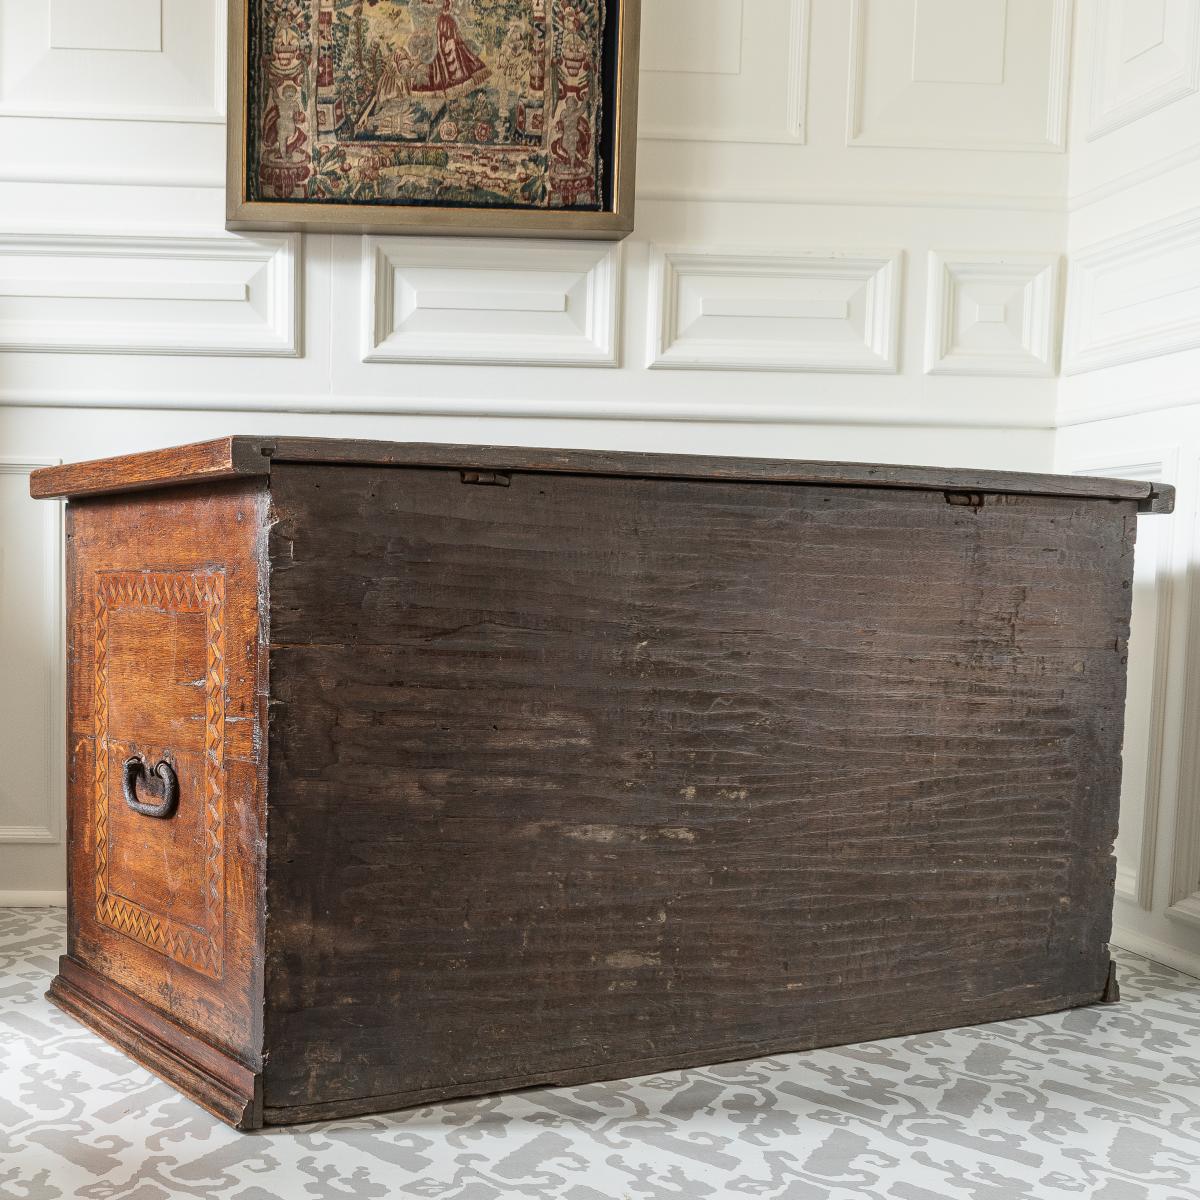 A large antique oak chest with architectural details and inlay, back view